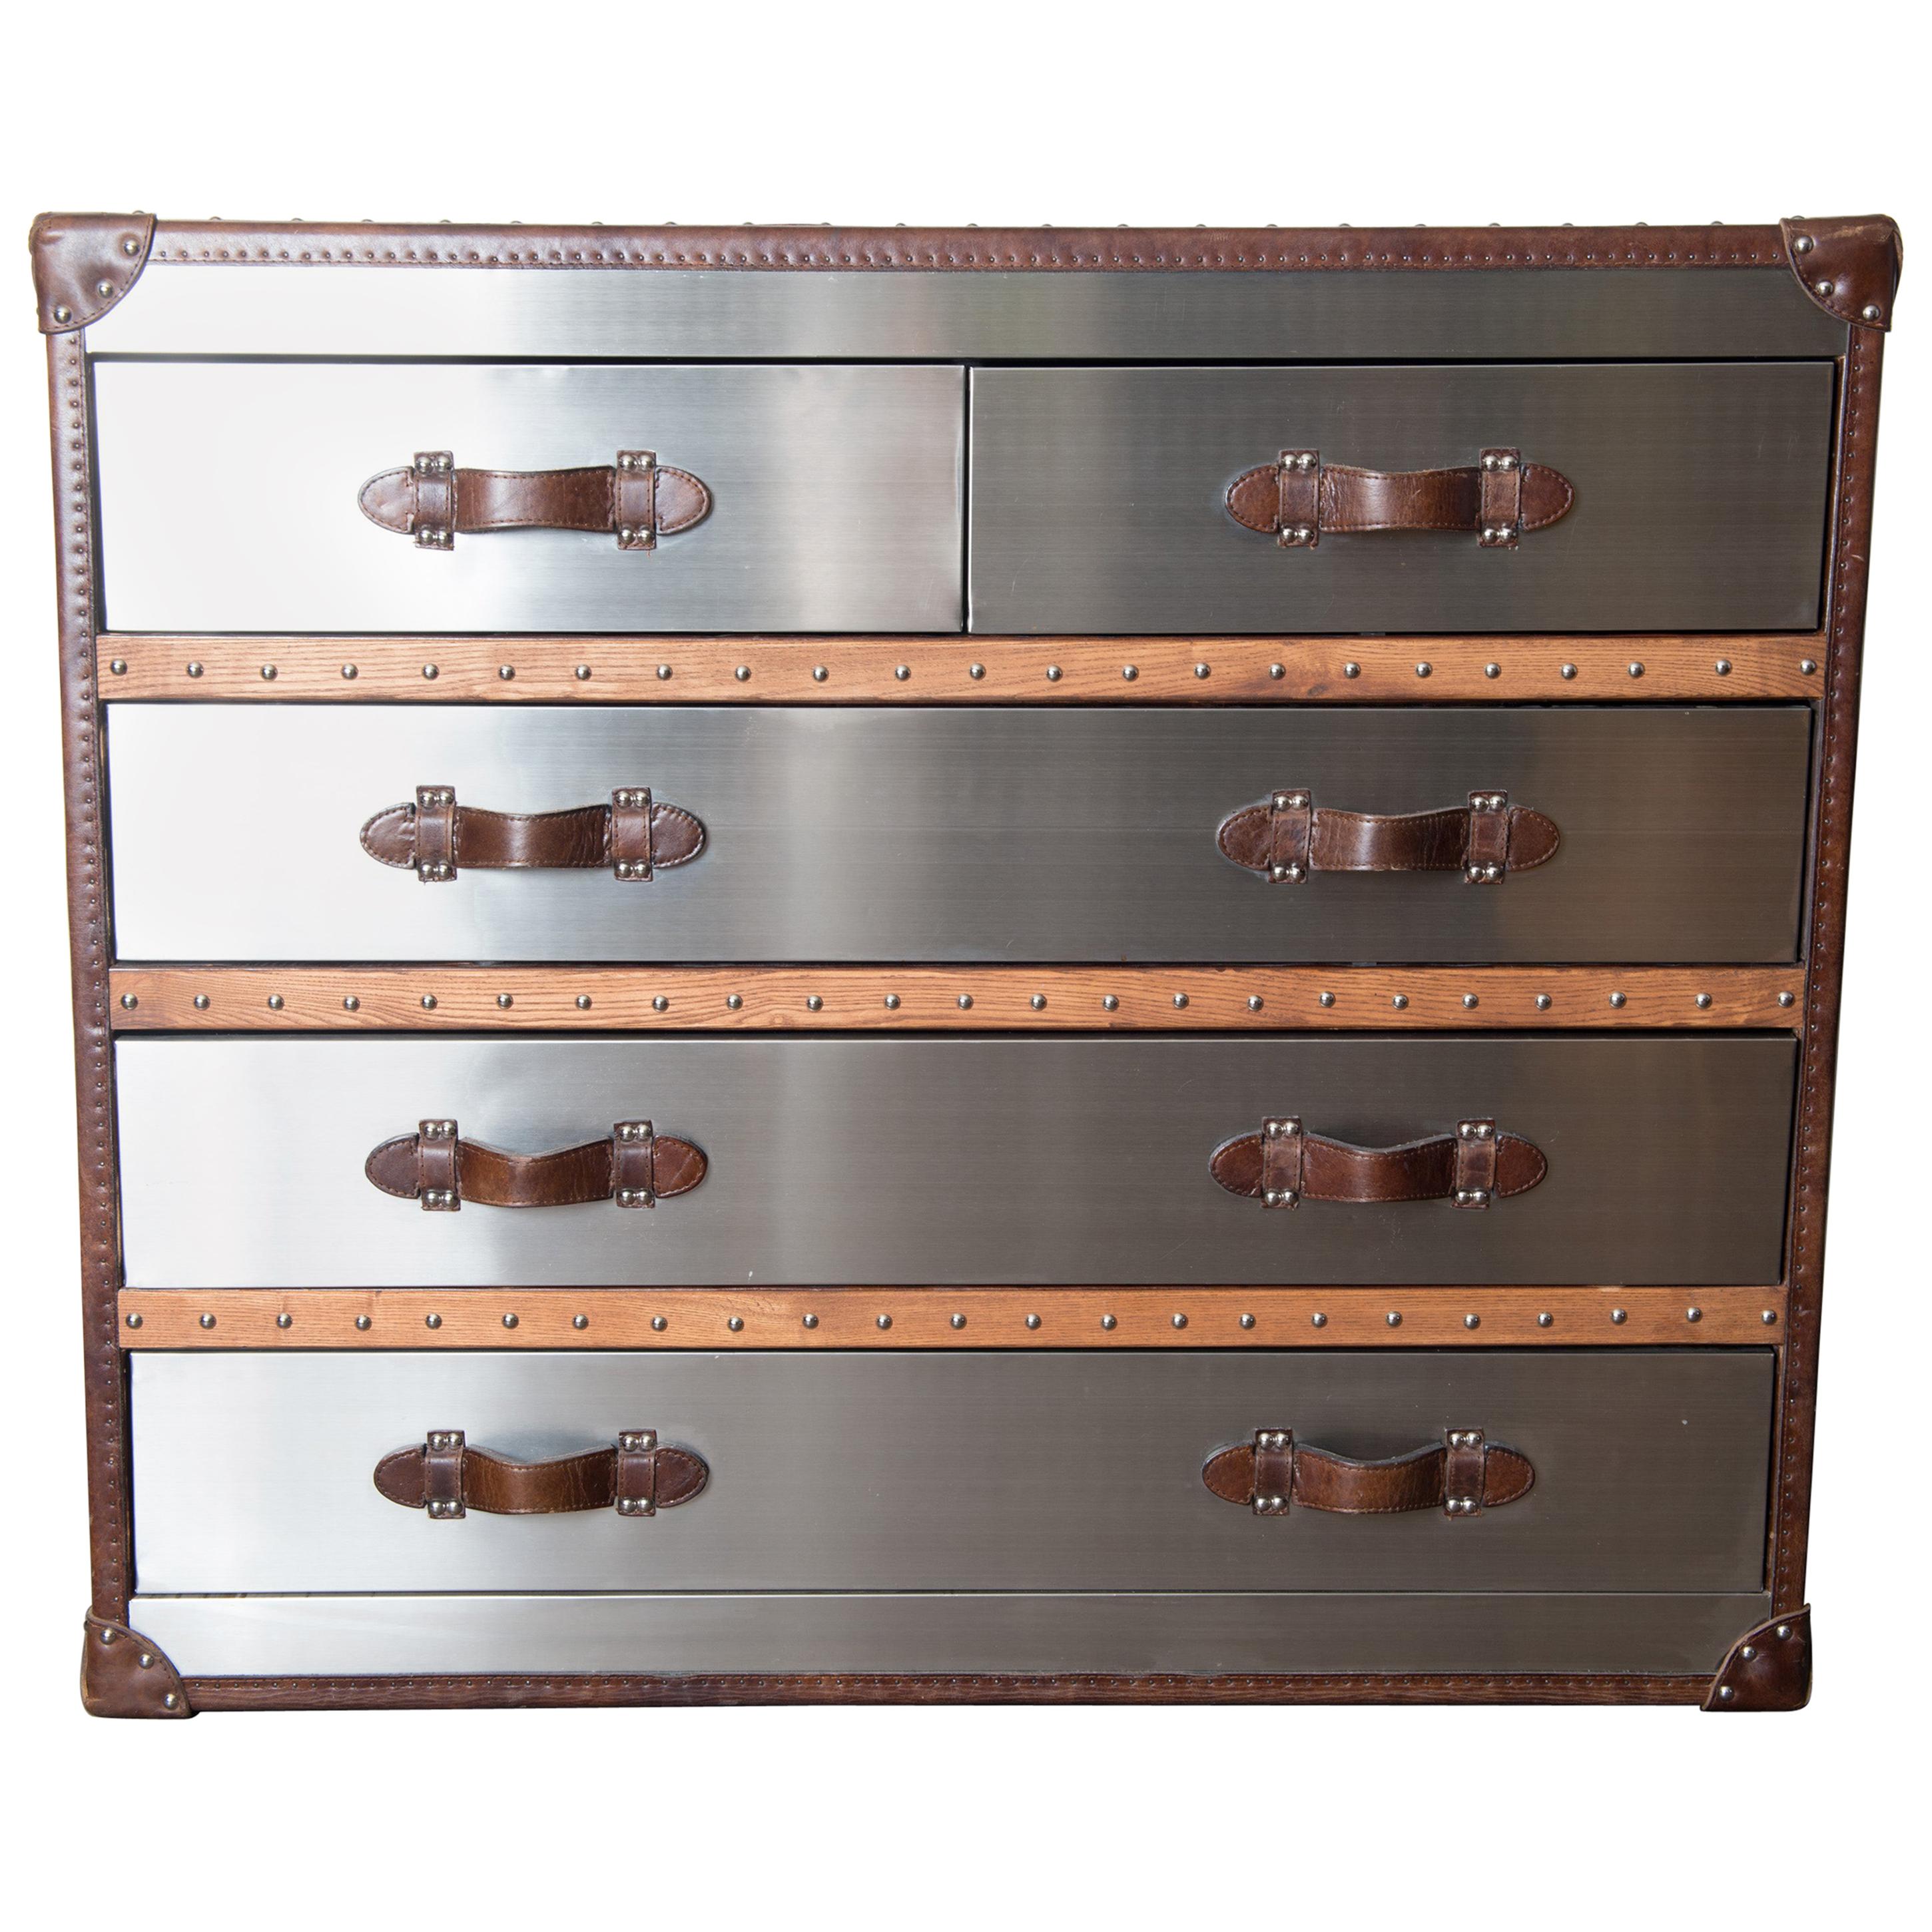 Hermes style Stainless Steel, Leather, Wood Chest of Drawers